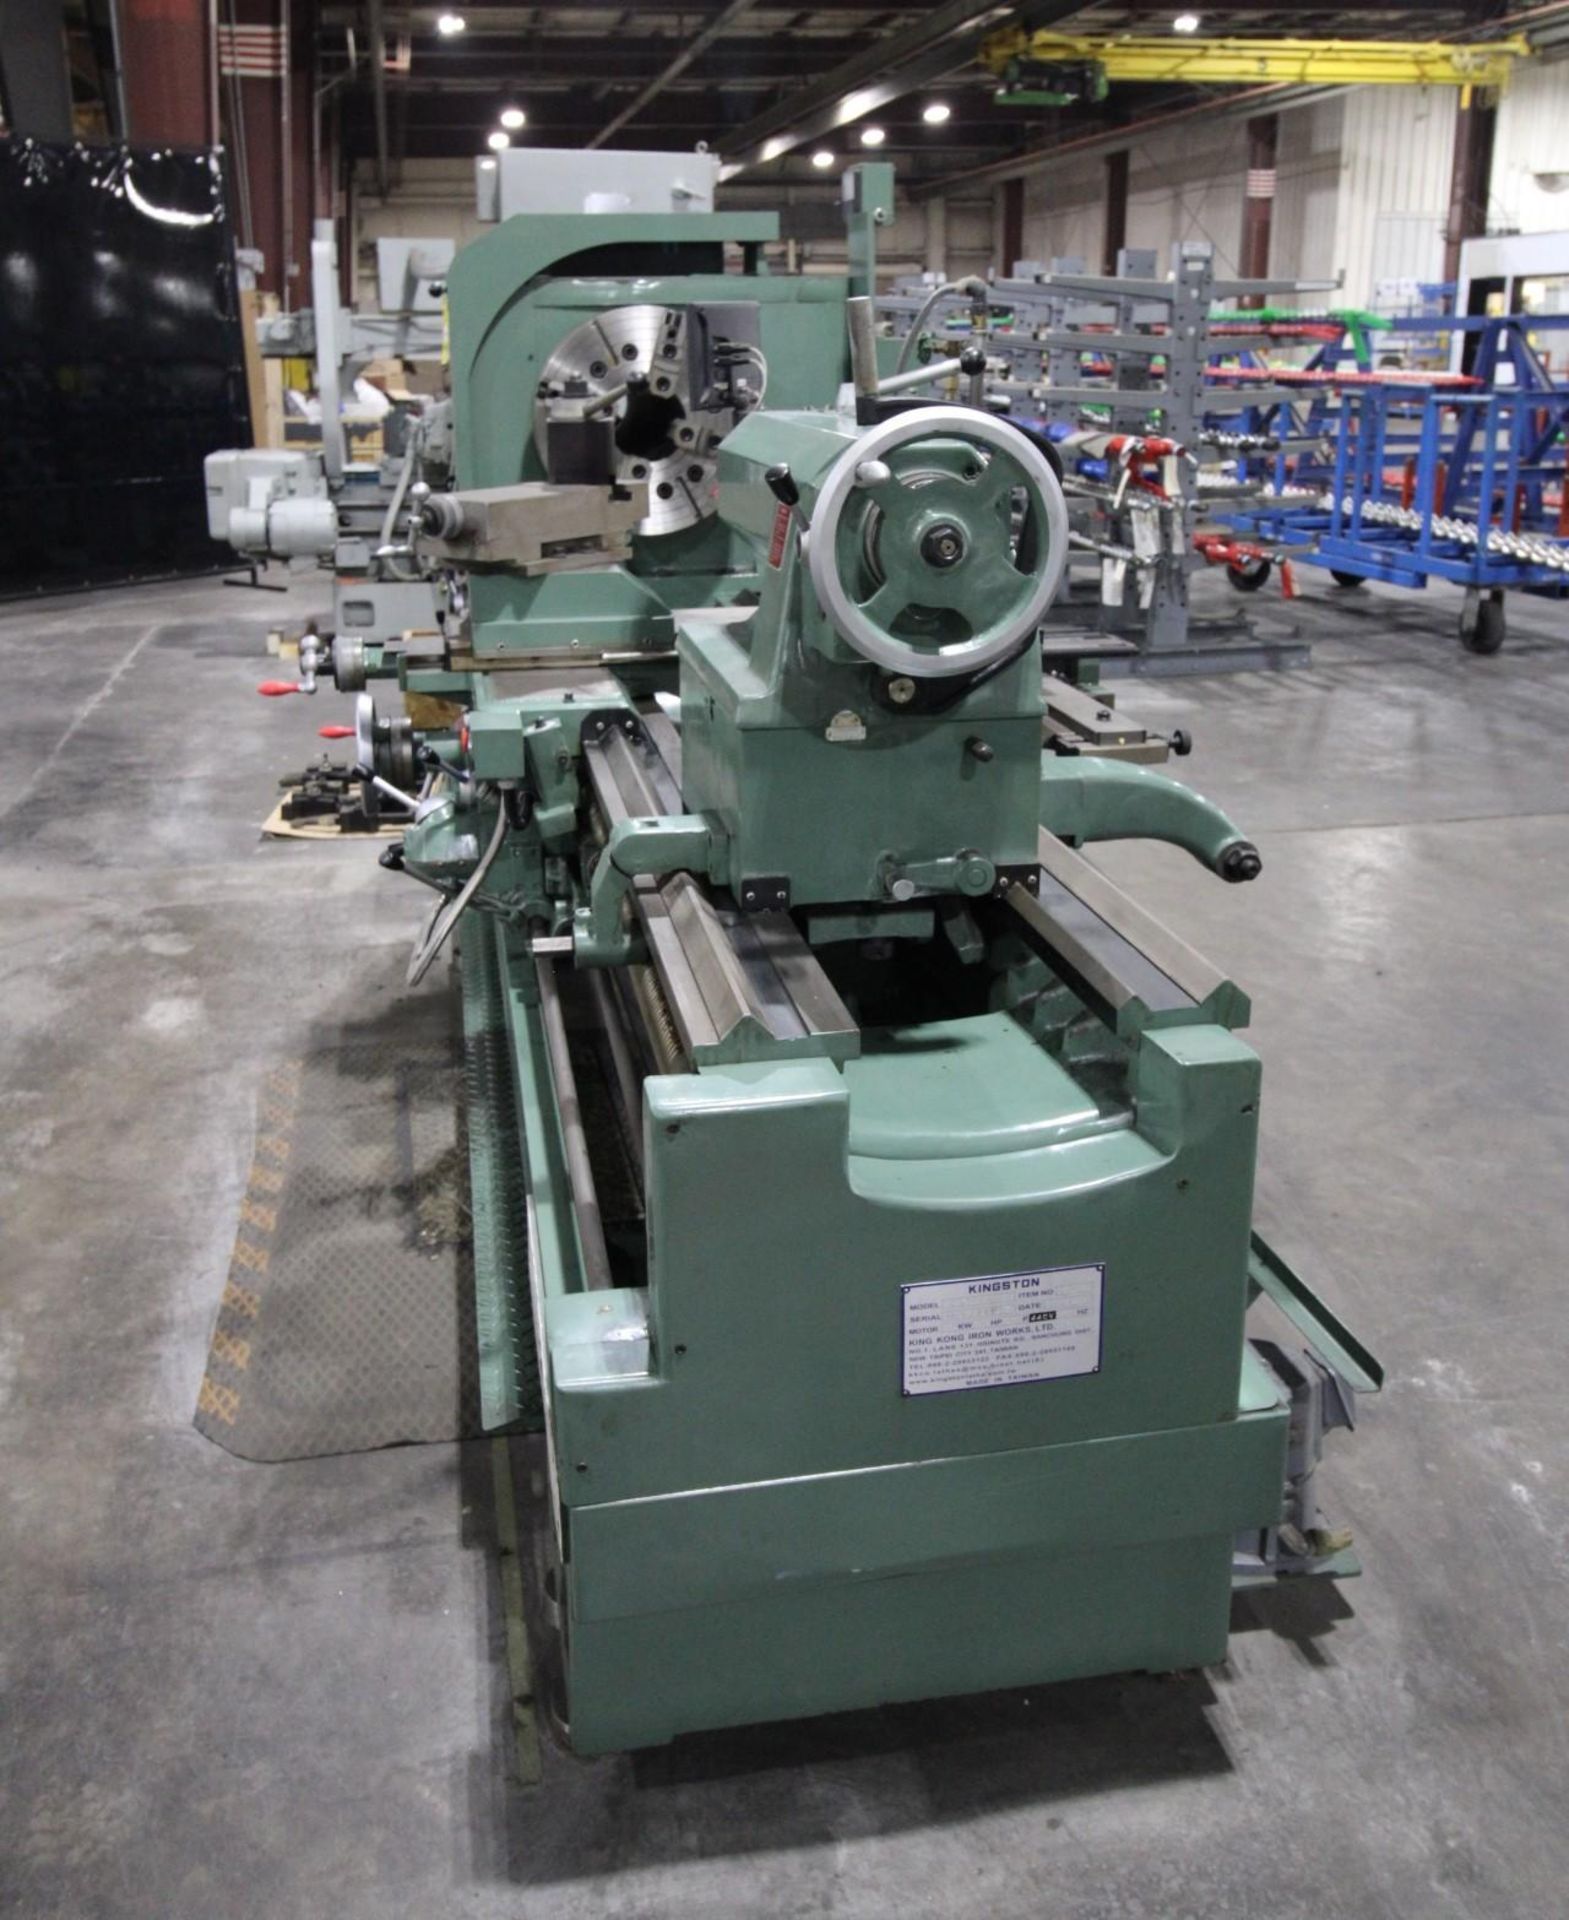 HOLLOW SPINDLE LATHE, KINGSTON HEAVY DUTY 34 HP-2000, new 2014, never used in production, 7-1/4" sp - Image 4 of 23